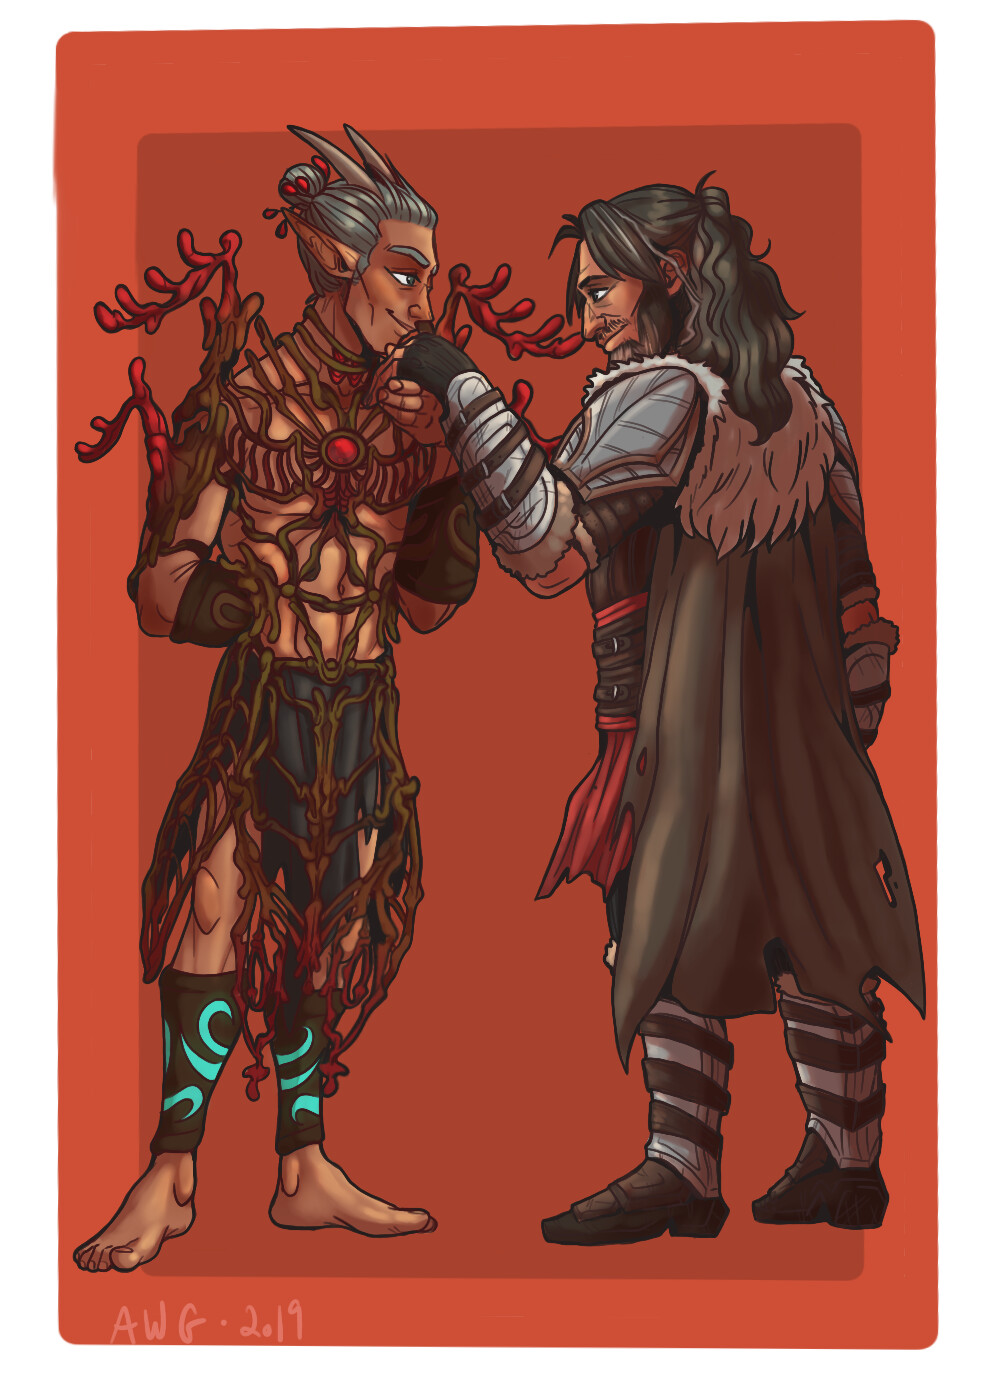 Divinity: Original Sin 2 Comm for a friend